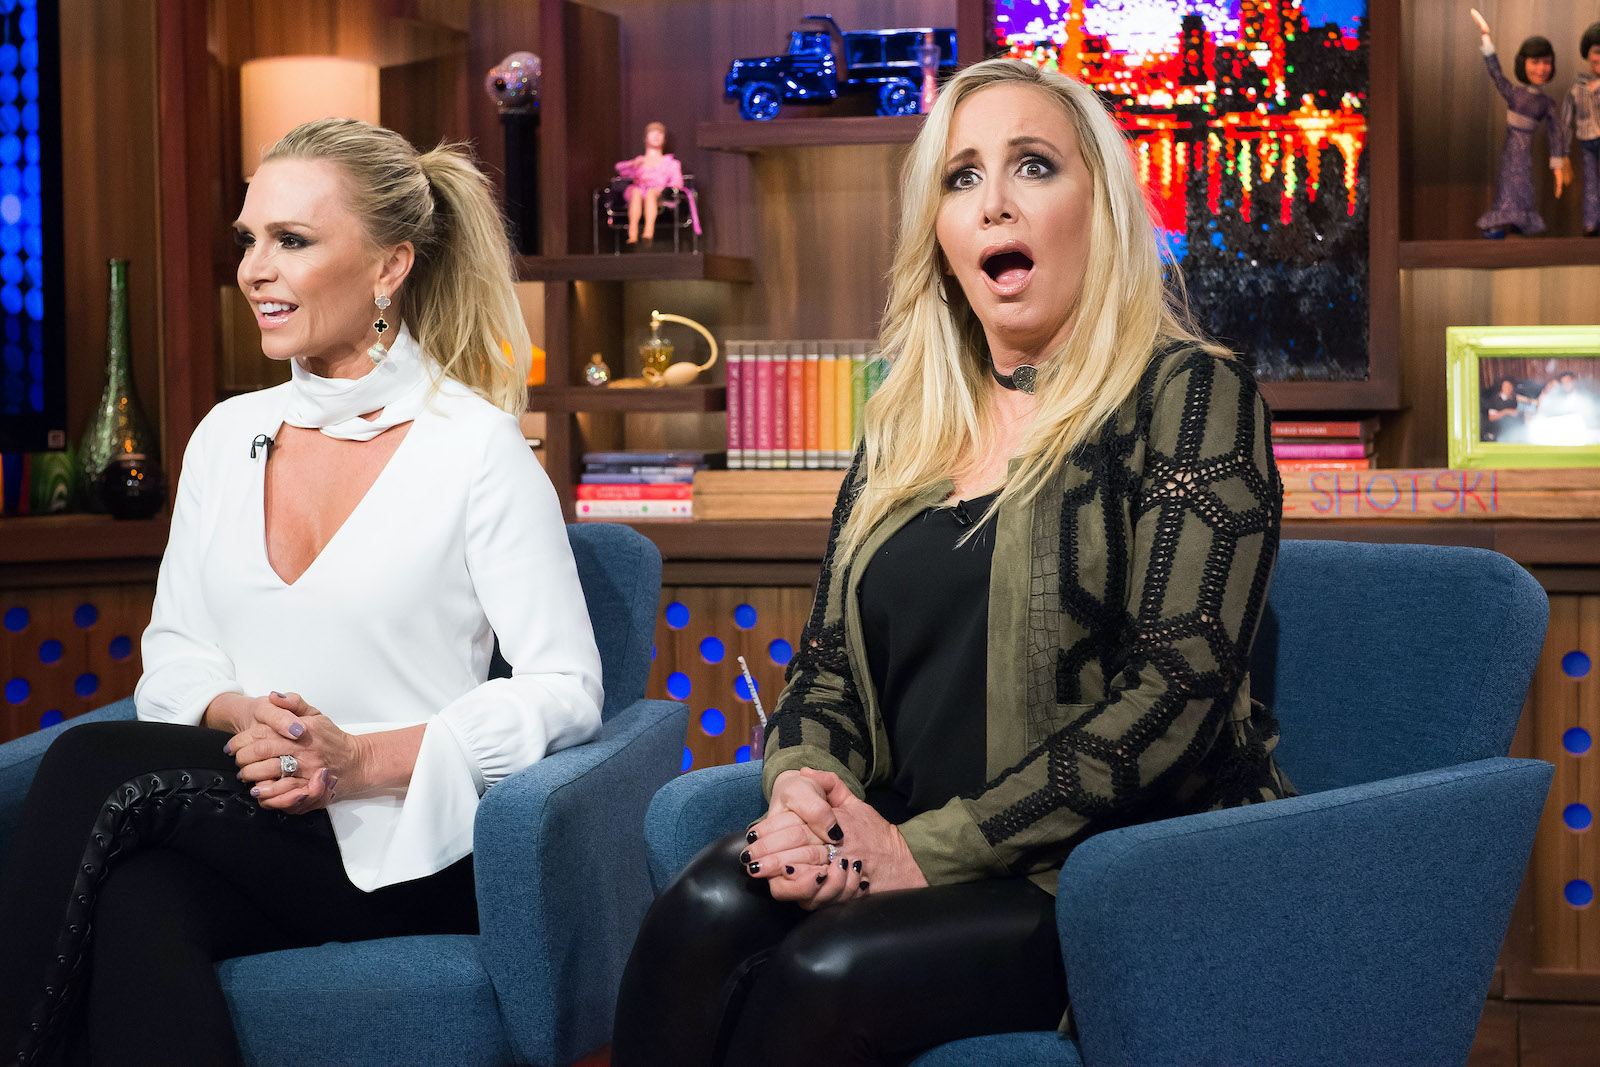 Tamra Judge and Shannon Beador from RHOC on WWHL